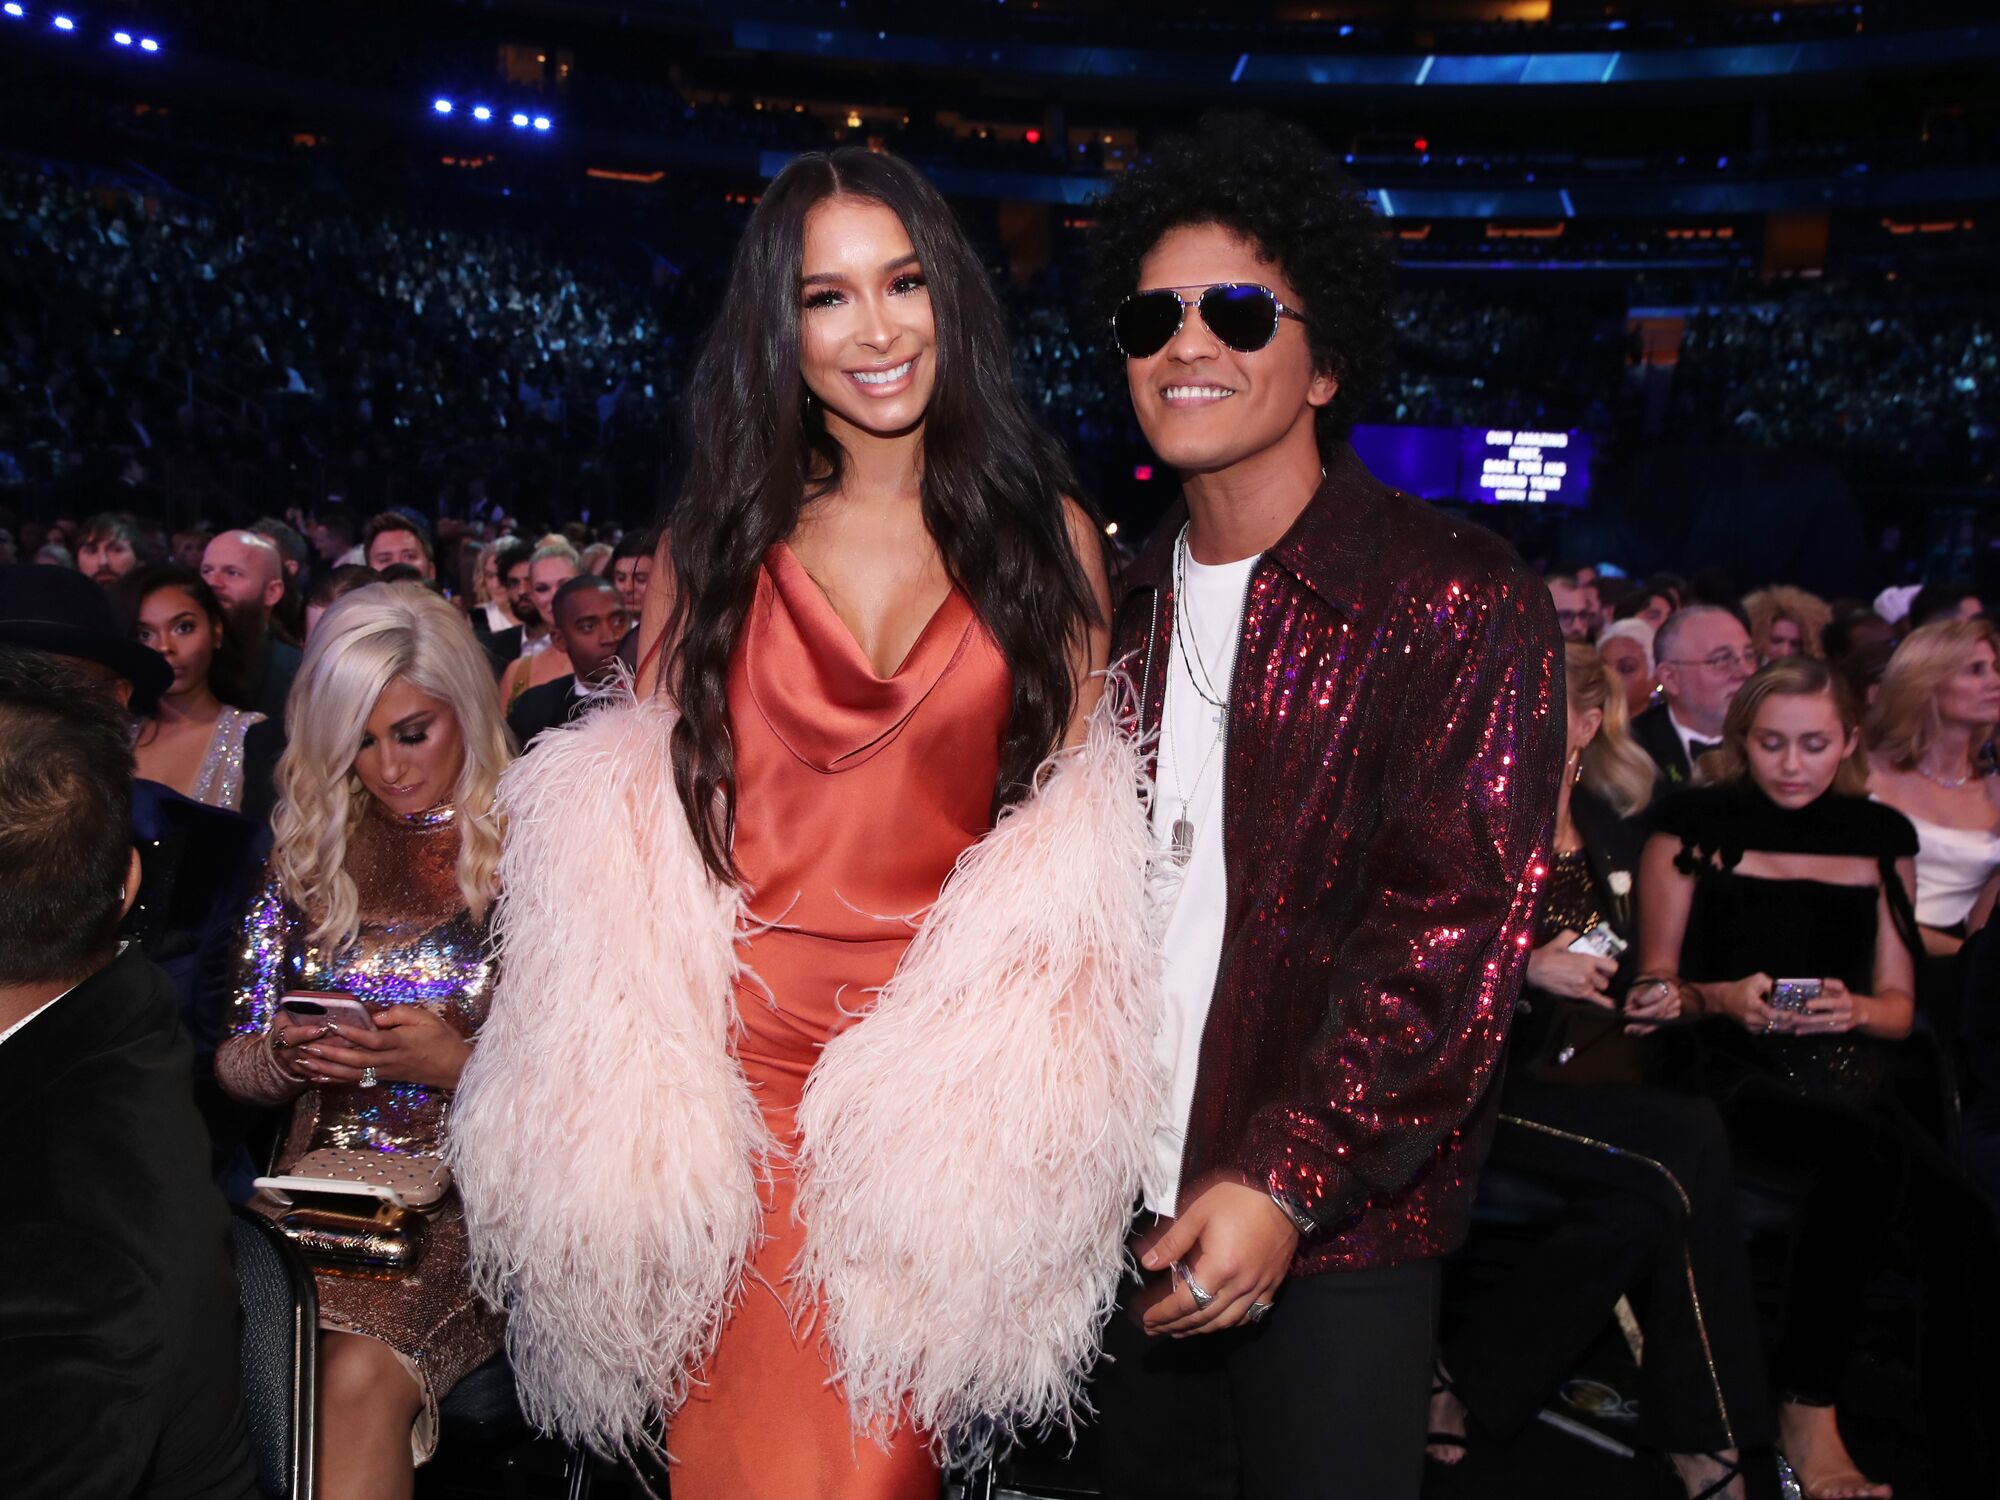 Bruno Mars S Girlfriend Jessica Caban And Their Love Story